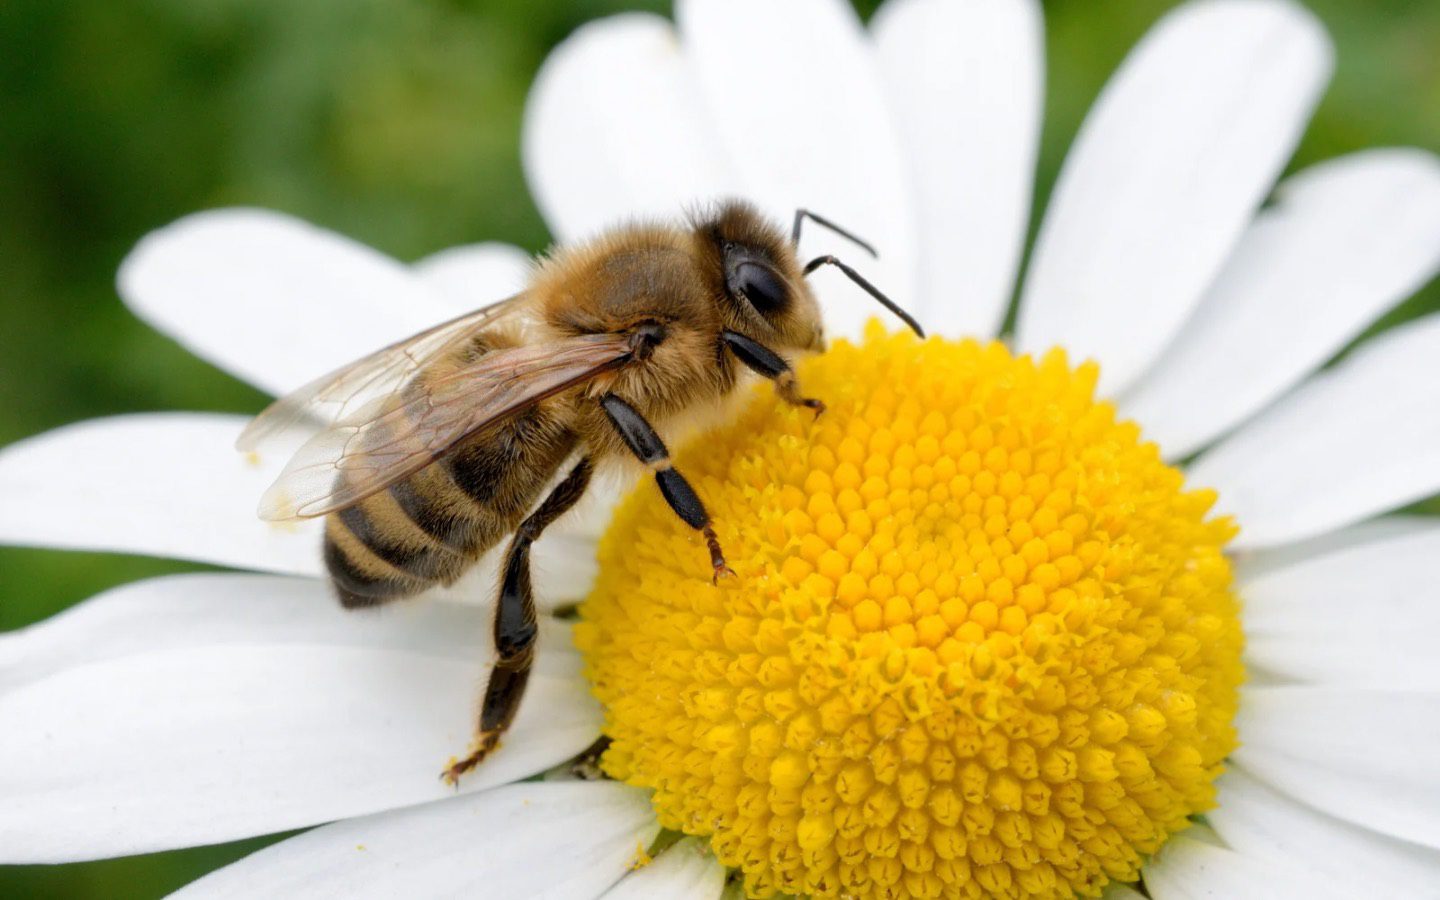 The Buzz About Pollinators